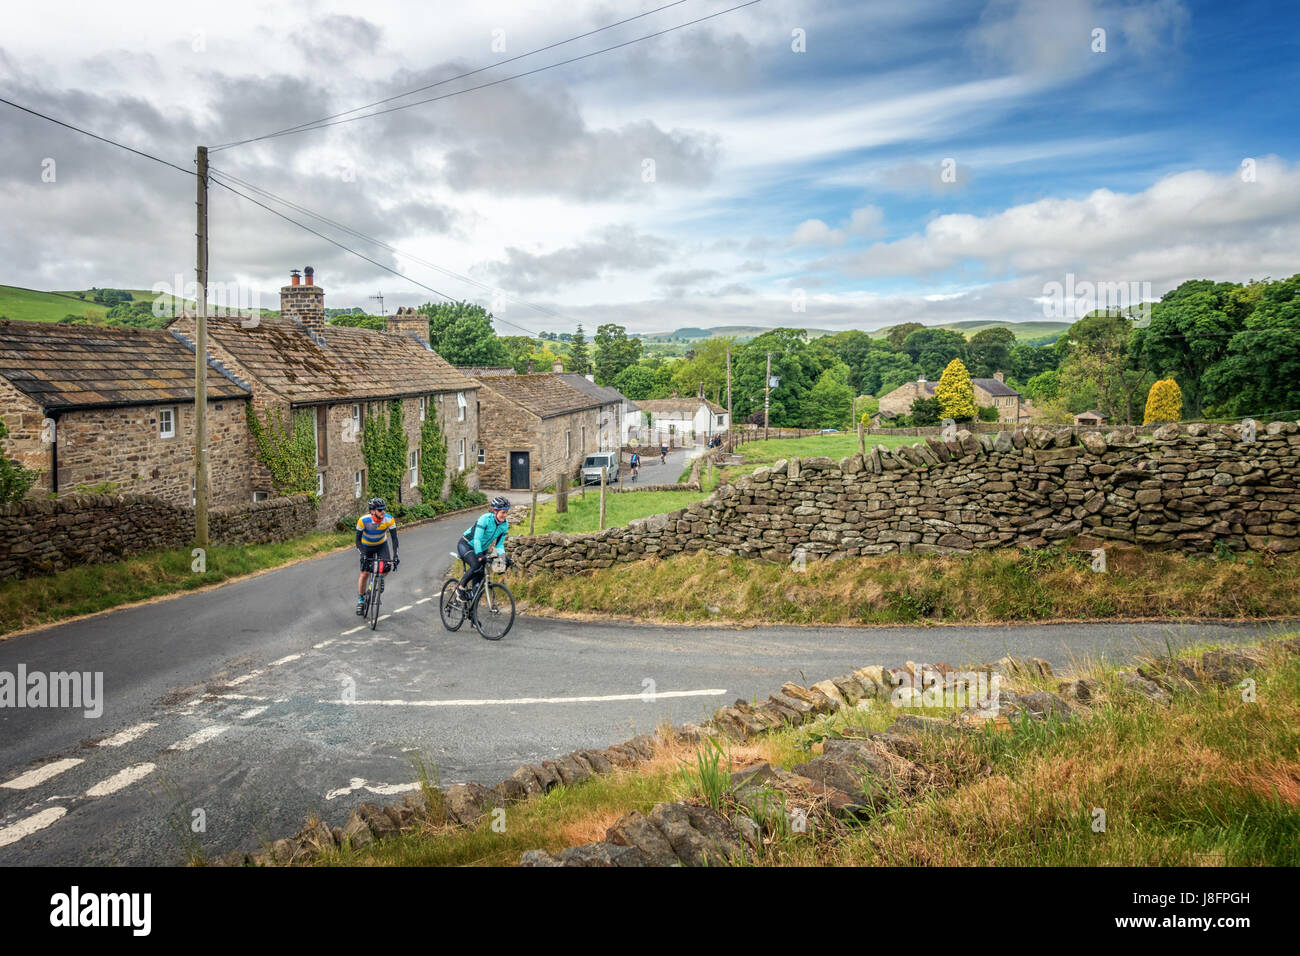 The quaint and rural Beamsley village and a popular Yorkshire lane with cyclists, Wharfedale, England Stock Photo